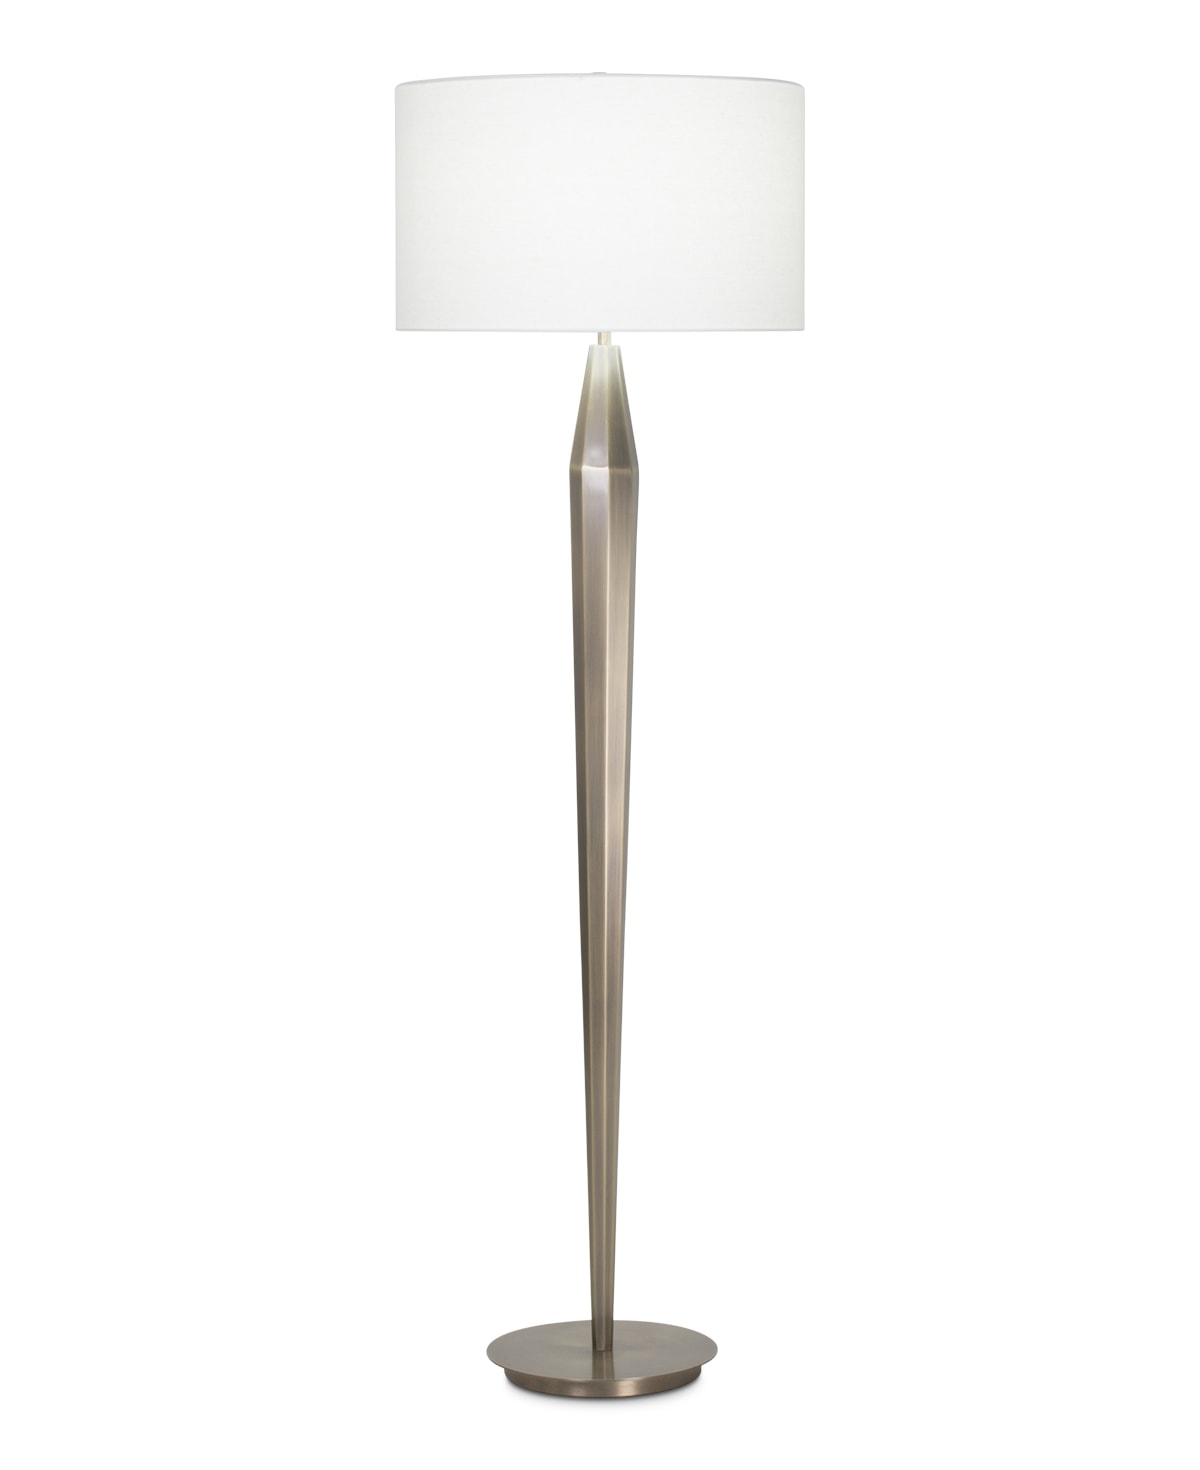 FlowDecor Landon Floor Lamp in metal with antique brass finish and off-white linen drum shade (# 3982)